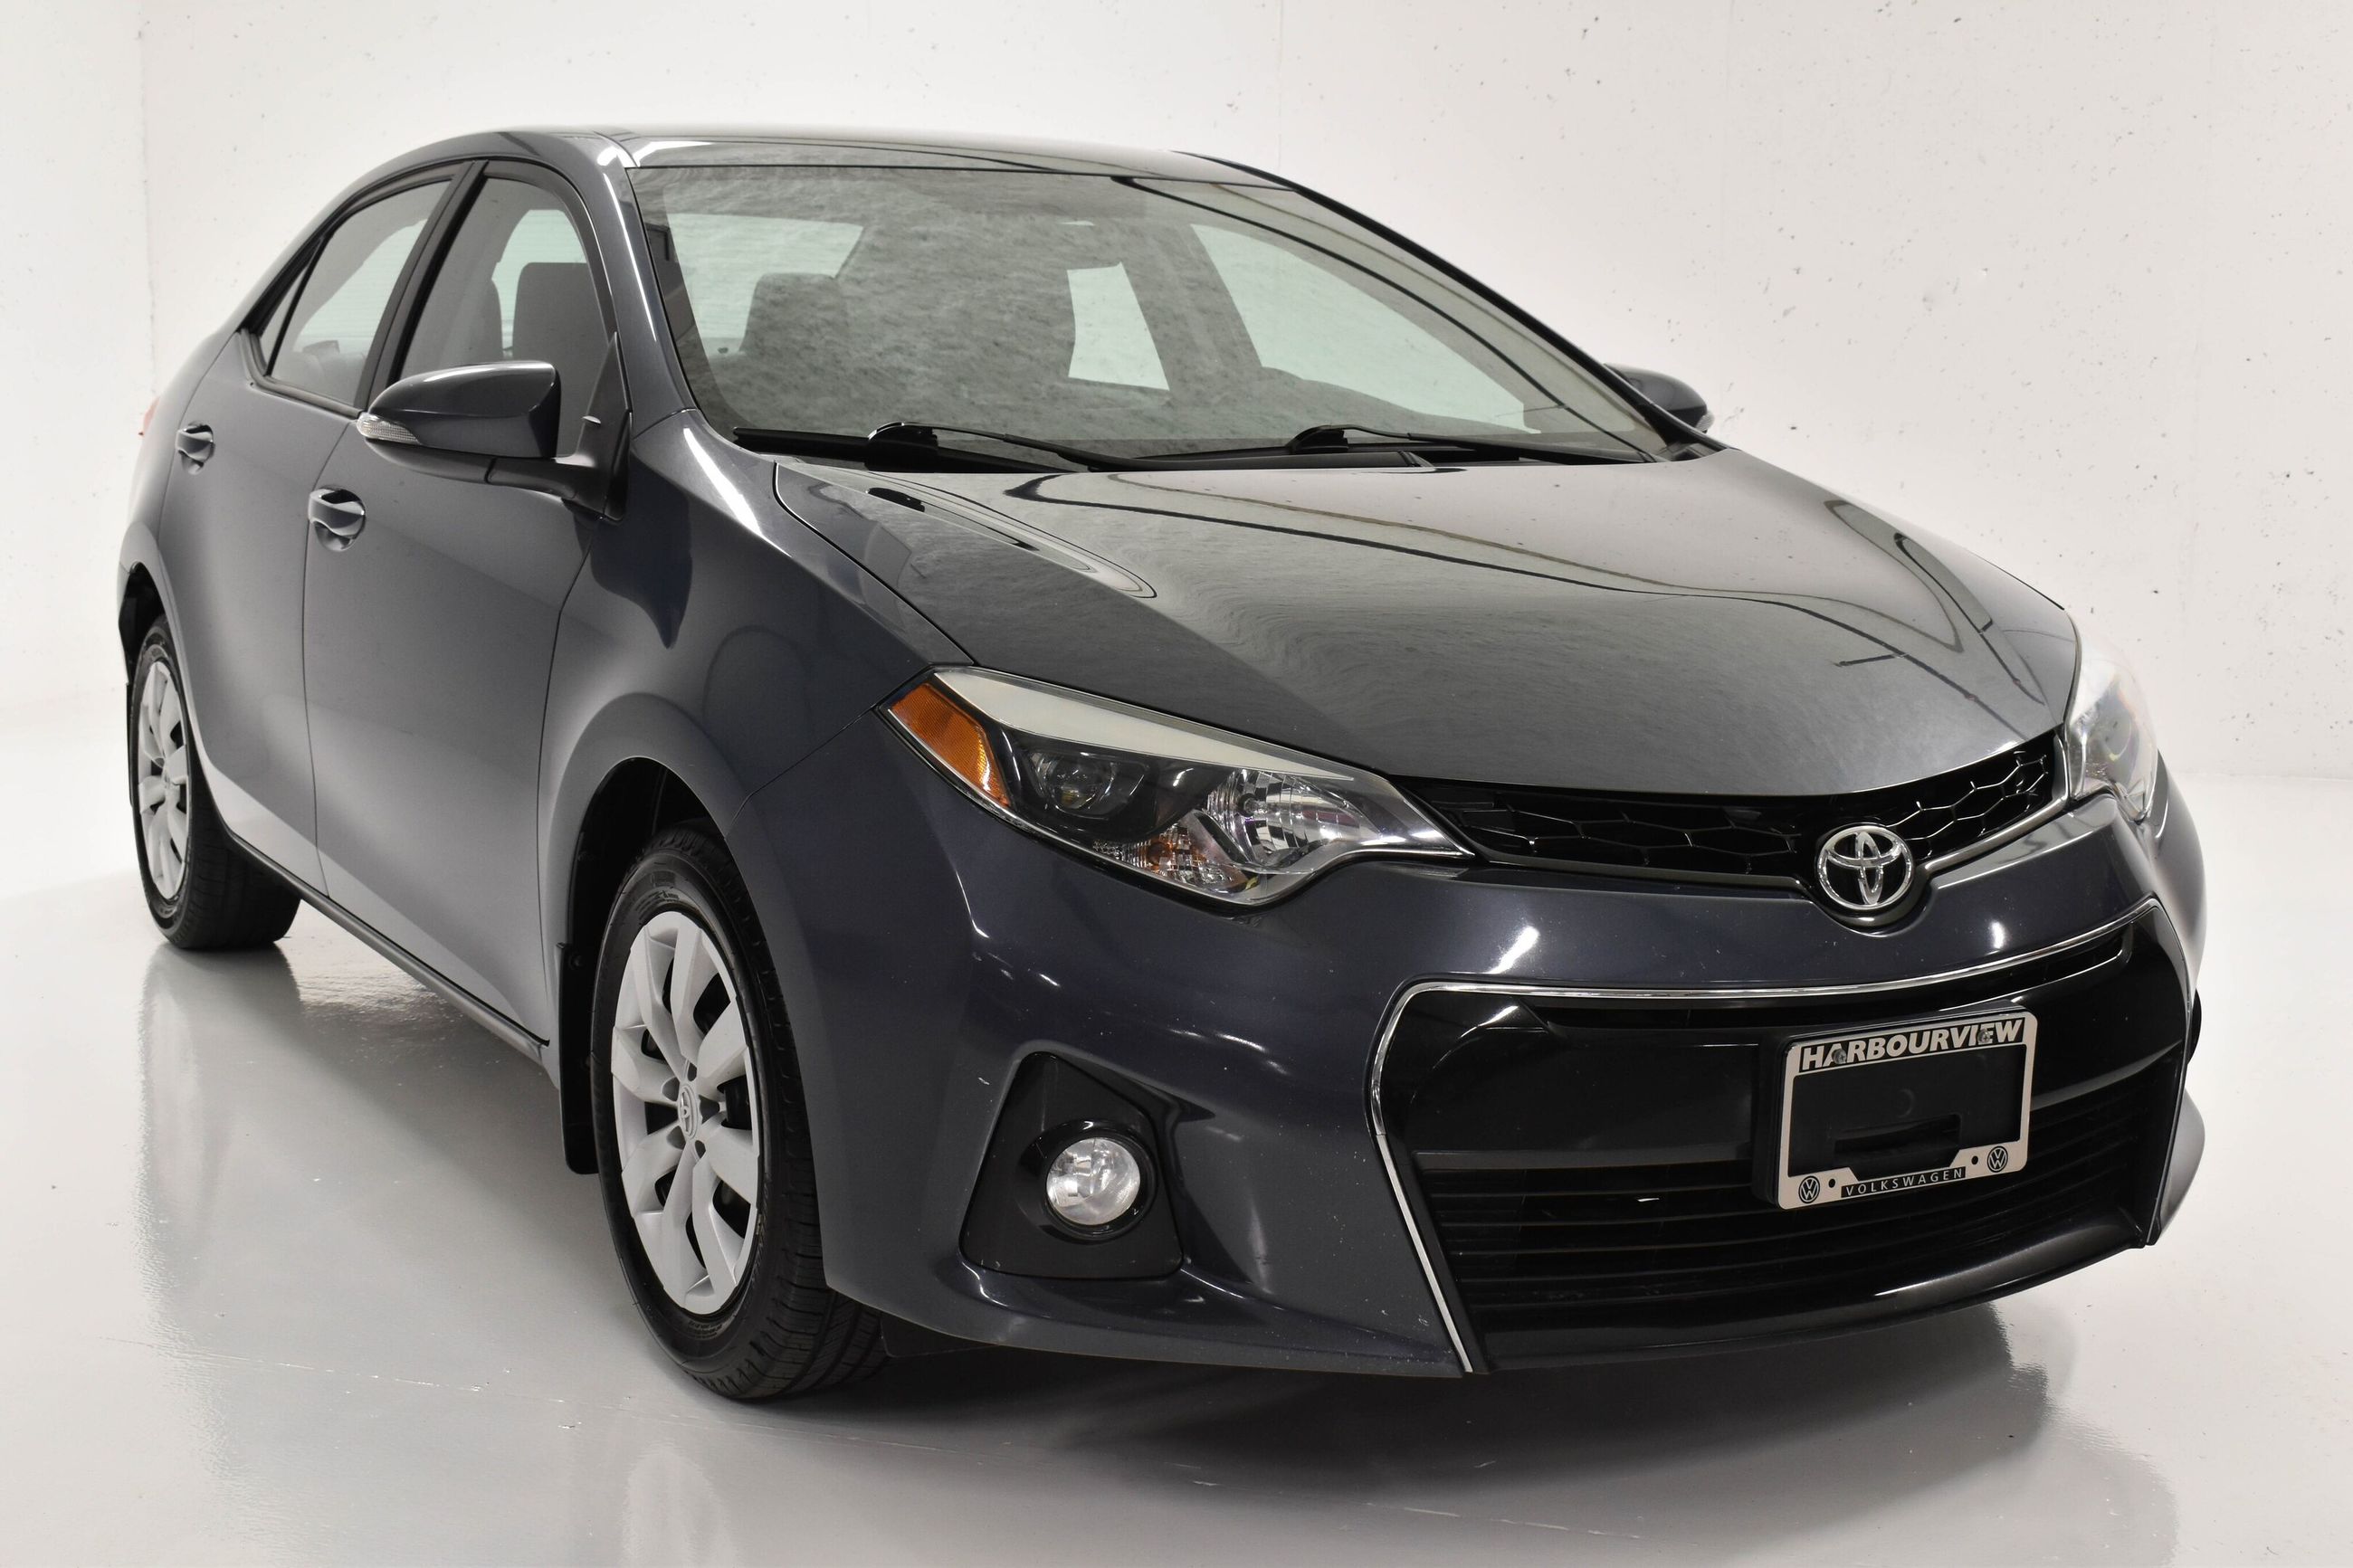 Used 2014 Toyota Corolla CE for Sale 9887 Harbourview VW